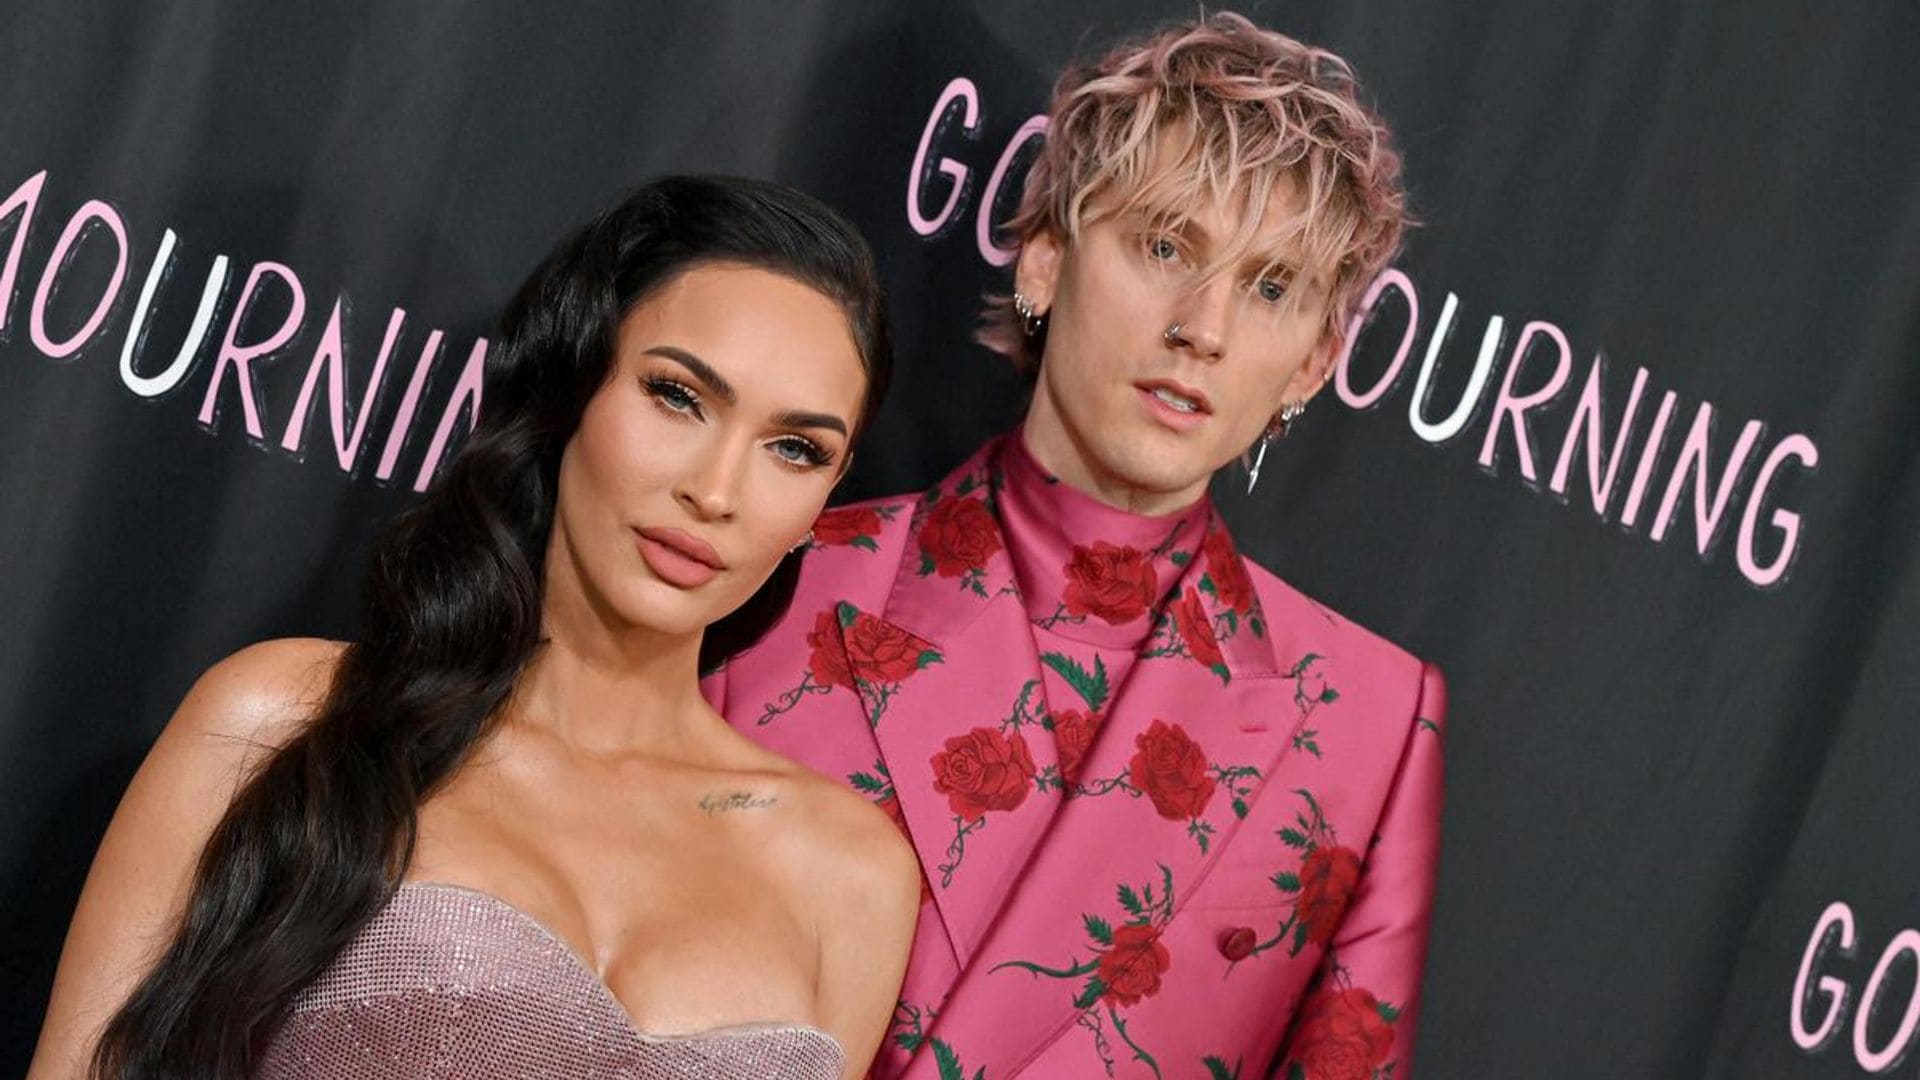 Are Megan Fox and Machine Gun Kelly together? She clarifies relationship in new podcast